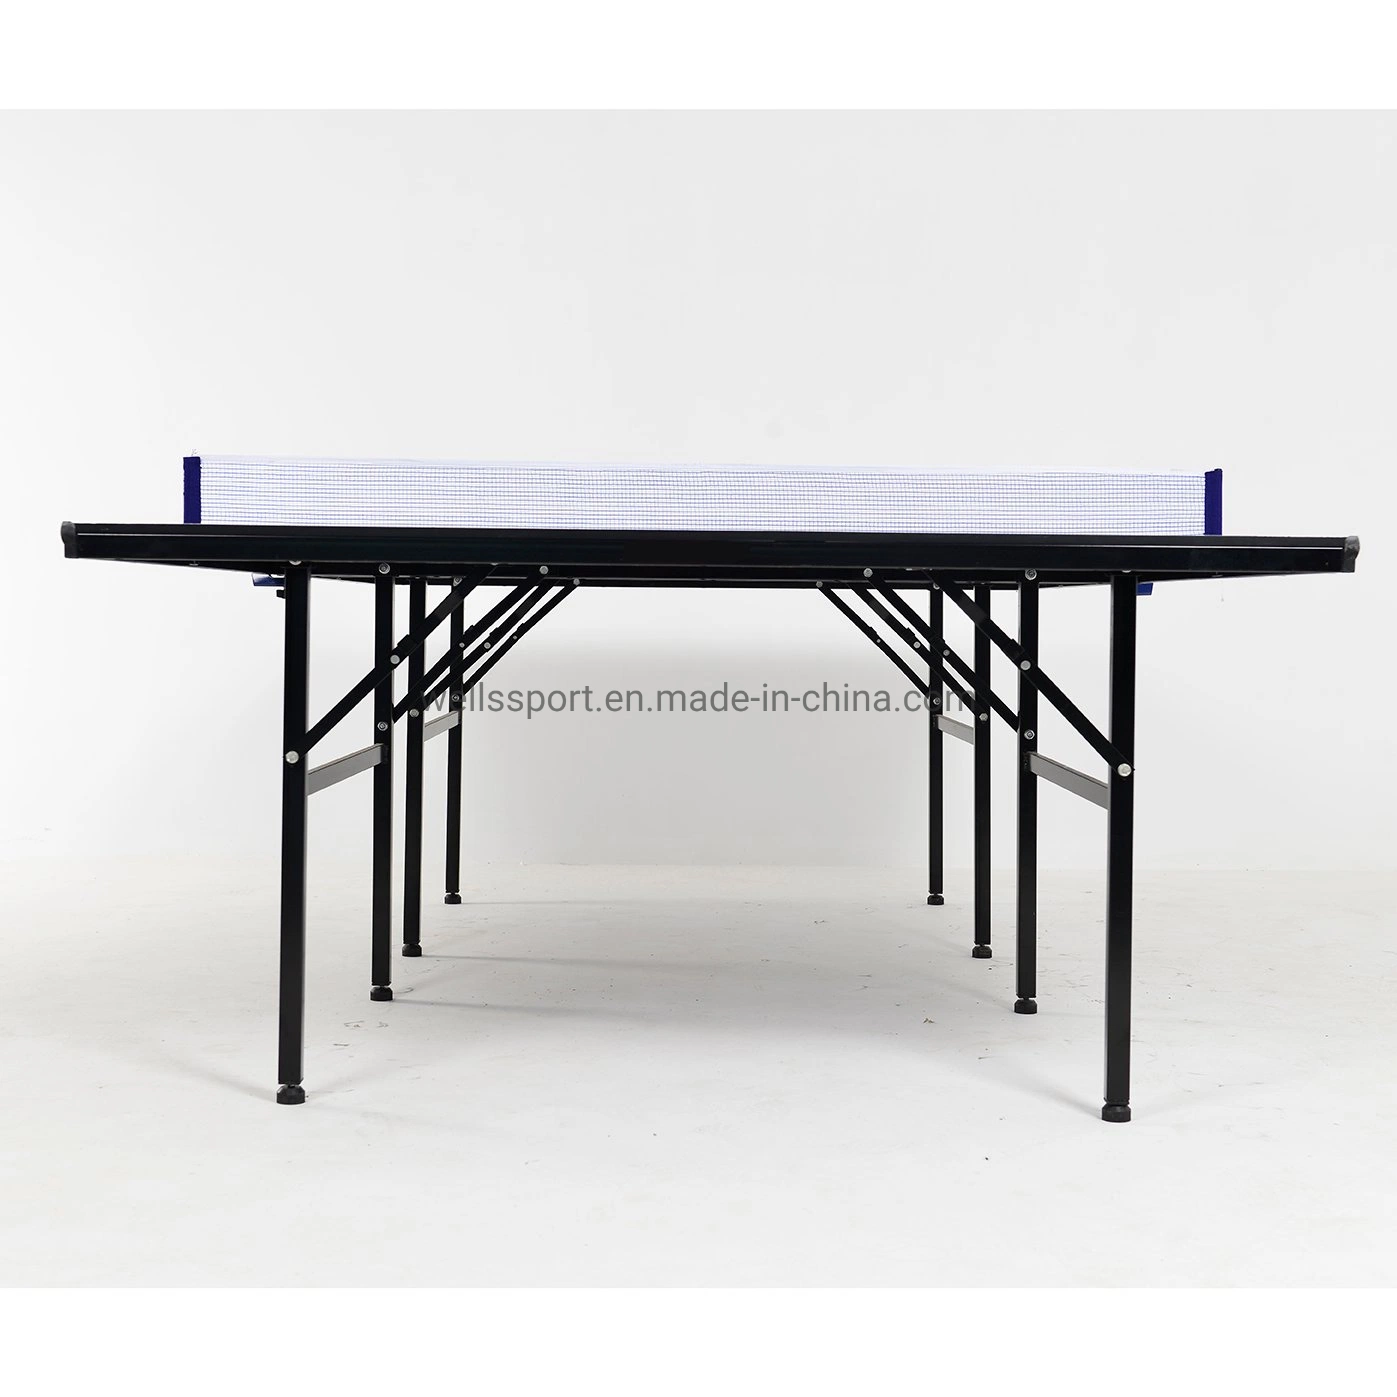 Hot Sale 12 mm Panel High Elasticity Folding &Movable Children Indoor Tennis Table for Kids Playing